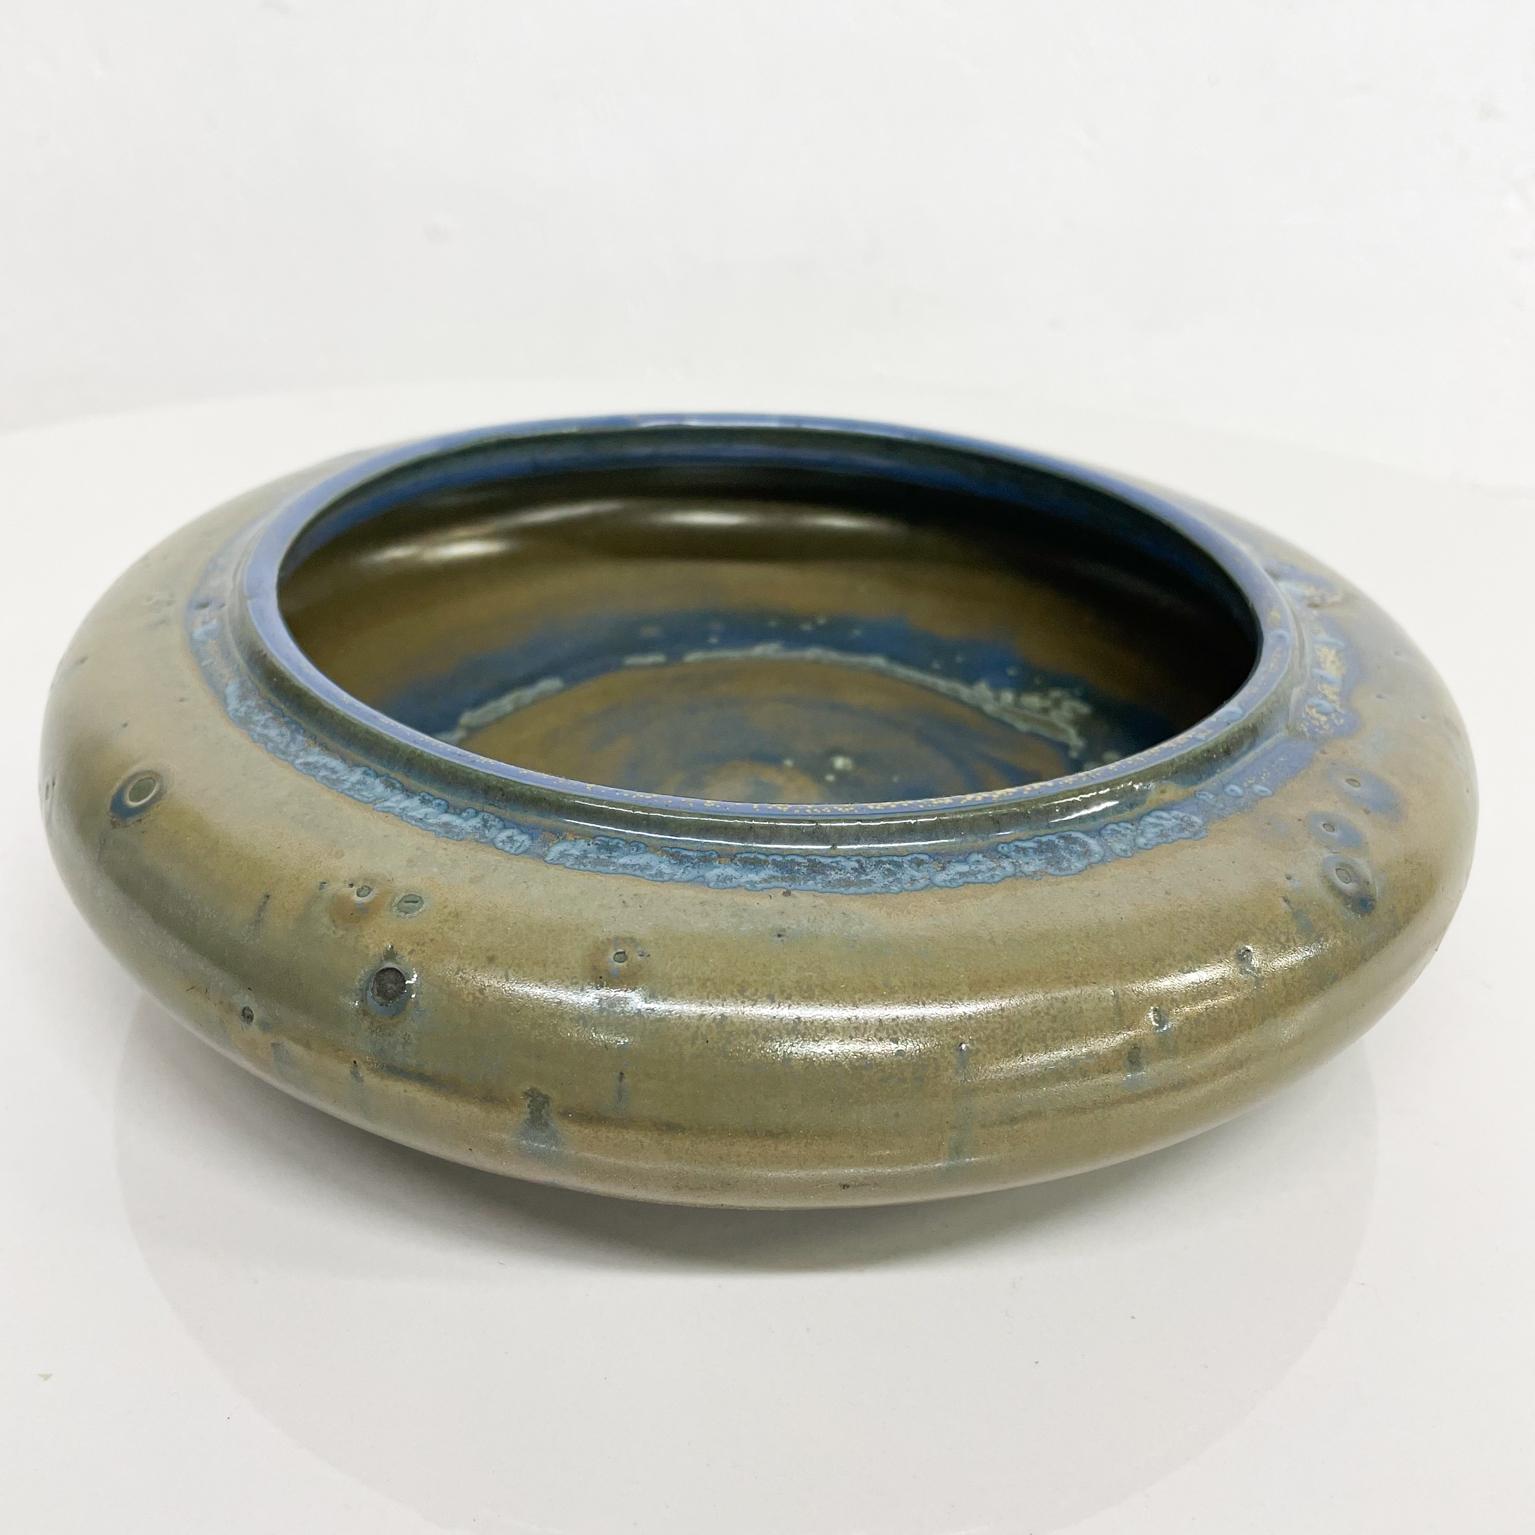 Art Pottery
1970s Zanesville Ohio Modern ceramic art pottery bowl speckled blue tie dye 
Vintage Art Pottery small round catch it all dish. 
Maker Stamped difficult to read.
Measures: 8.5 diameter x 2 tall
Vintage preowned good condition